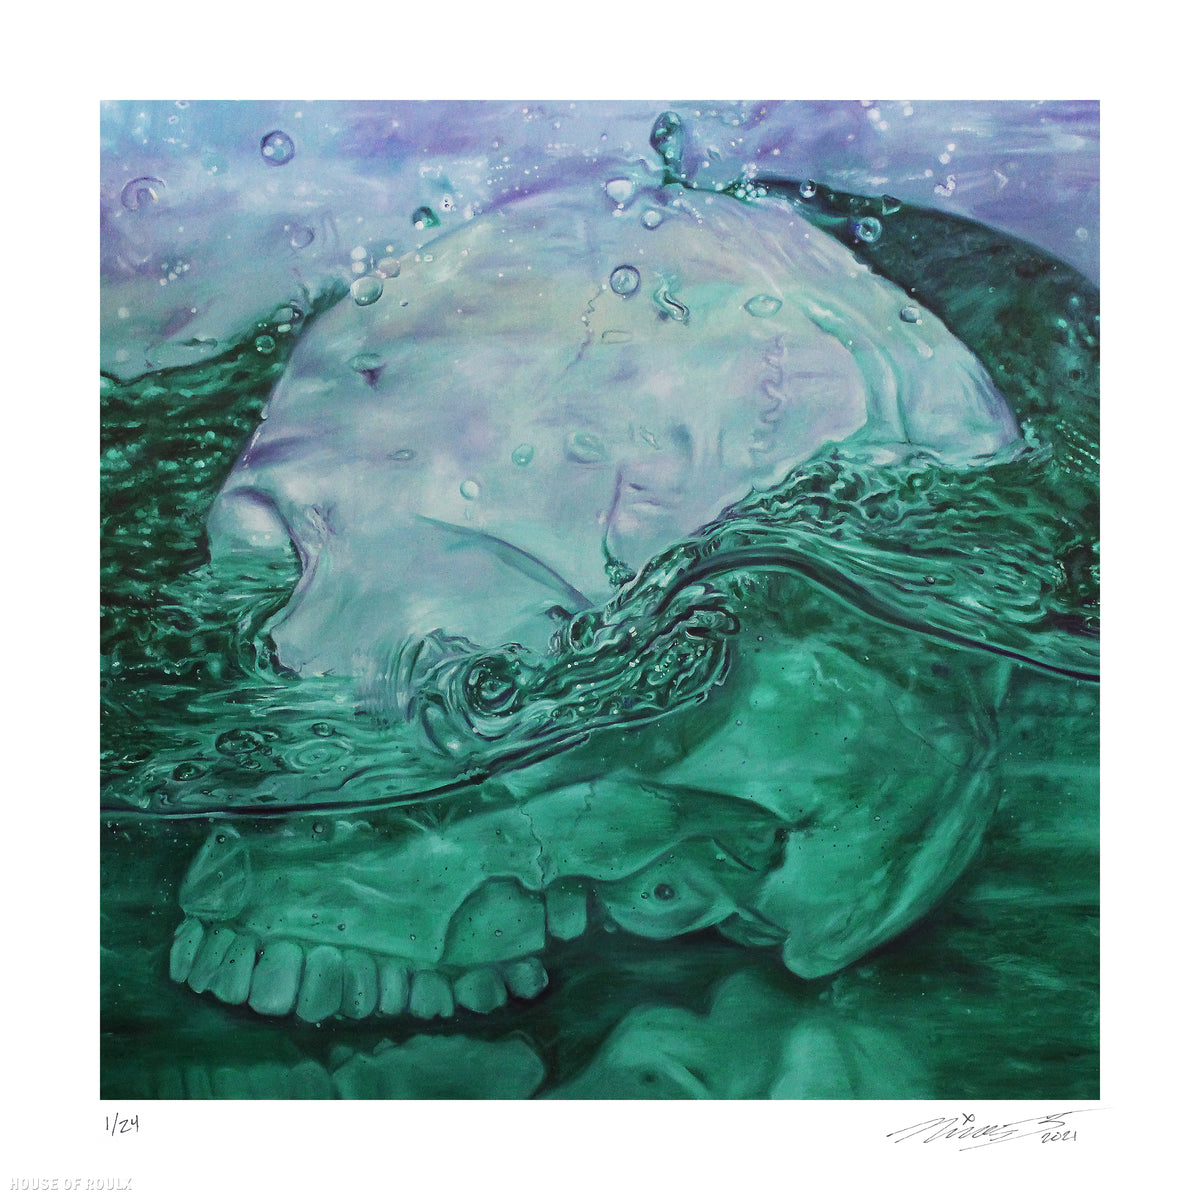 Nico Cathcart &quot;Oceans Rise, Empires Fall&quot; - Archival Print, Limited Edition of 24 - 12 x 12&quot;